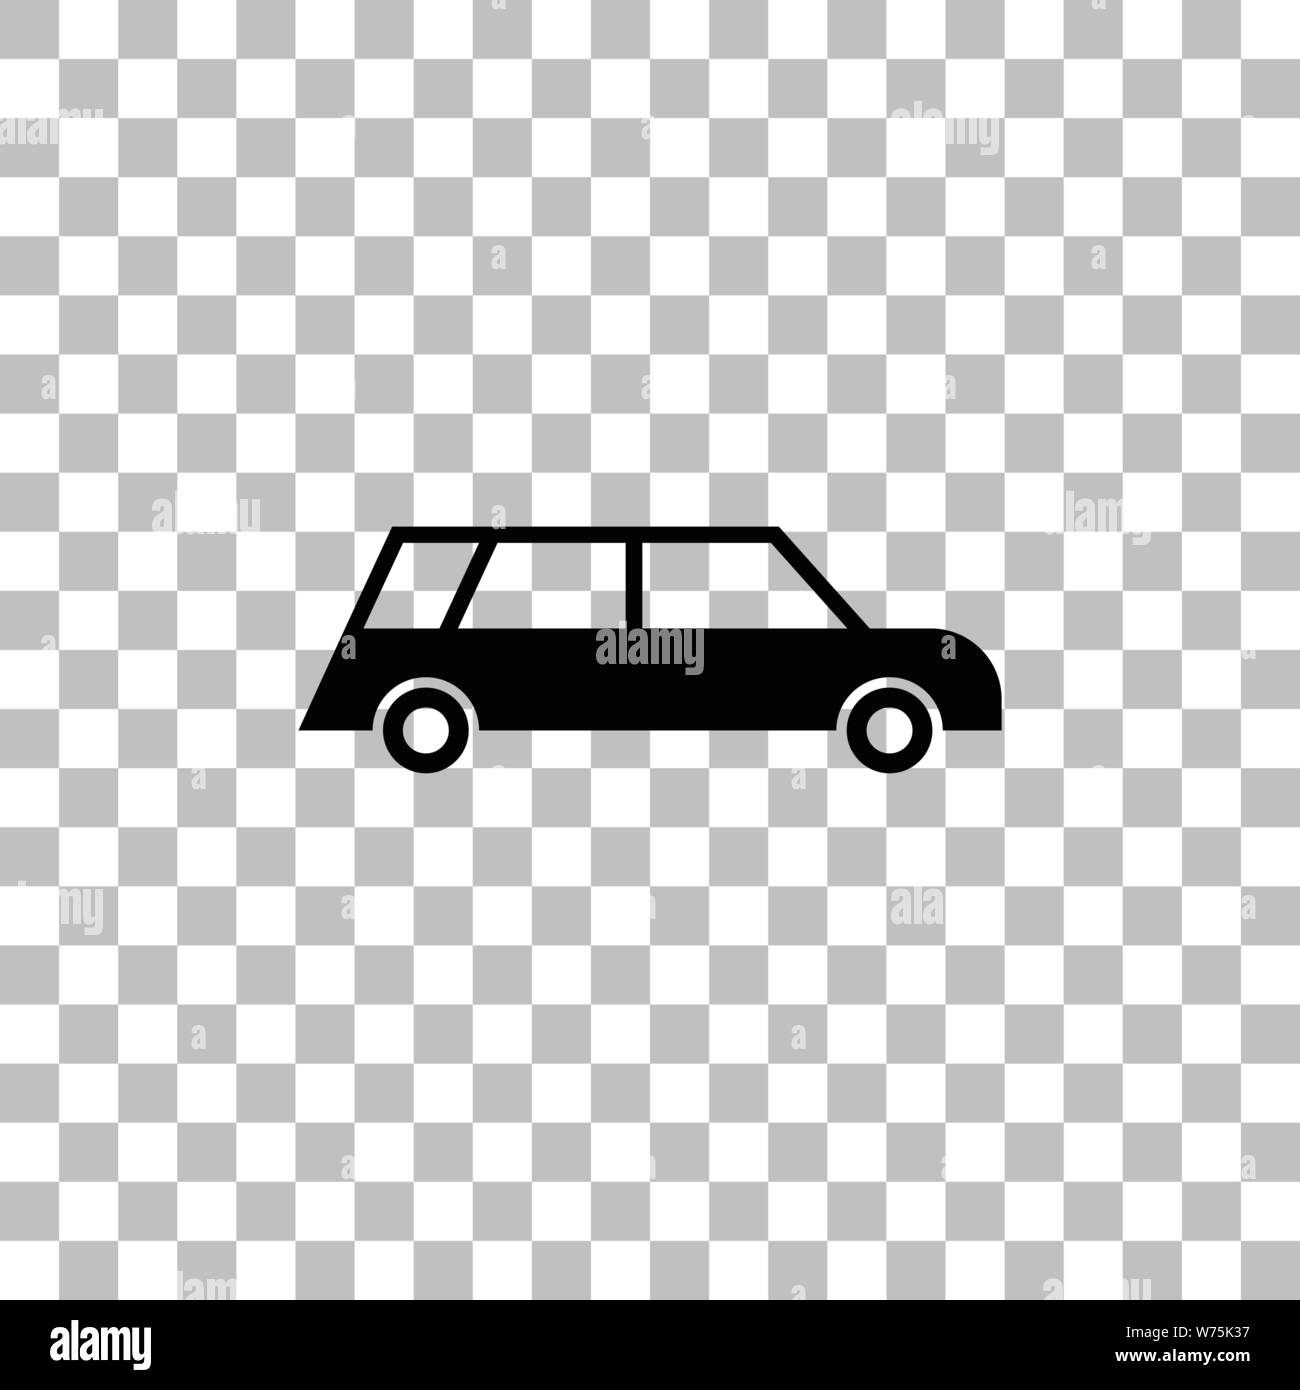 Passenger car. Black flat icon on a transparent background. Pictogram for your project Stock Vector